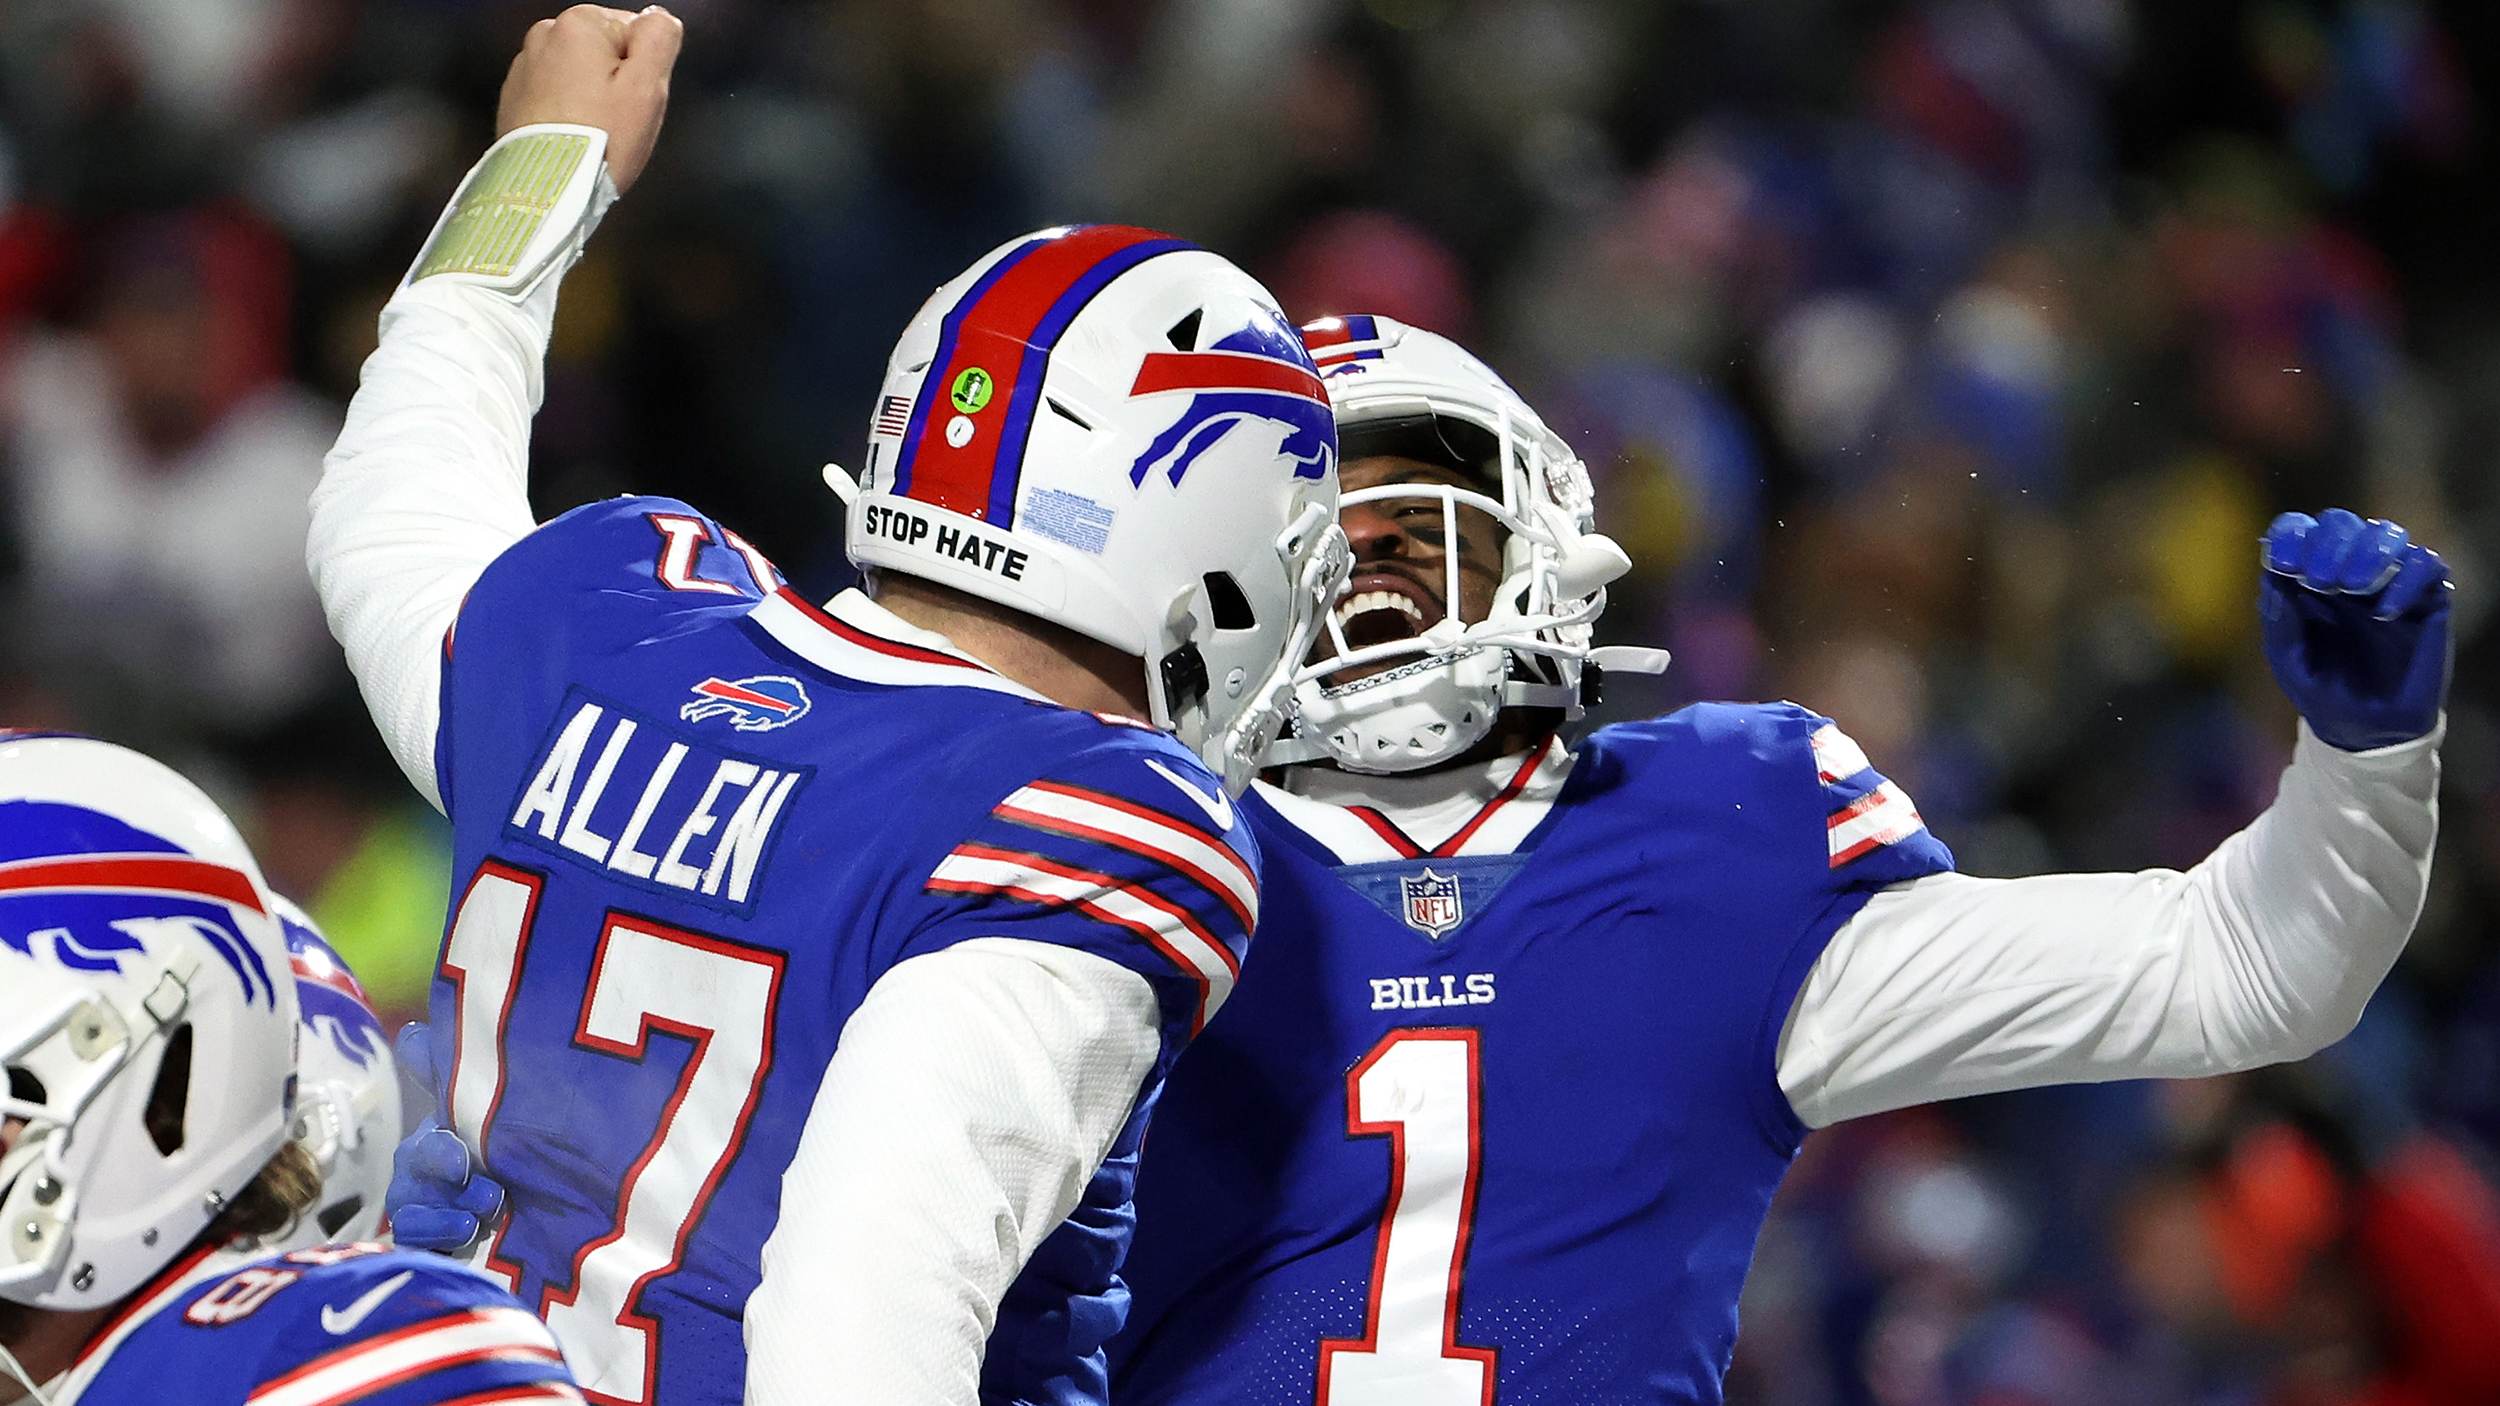 Josh Allen #17 and Emmanuel Sanders #1 of the Buffalo Bills celebrates a touchdown against New England Patriots during the third quarter in the AFC Wild Card playoff game at Highmark Stadium on January 15, 2022 in Buffalo, New York.